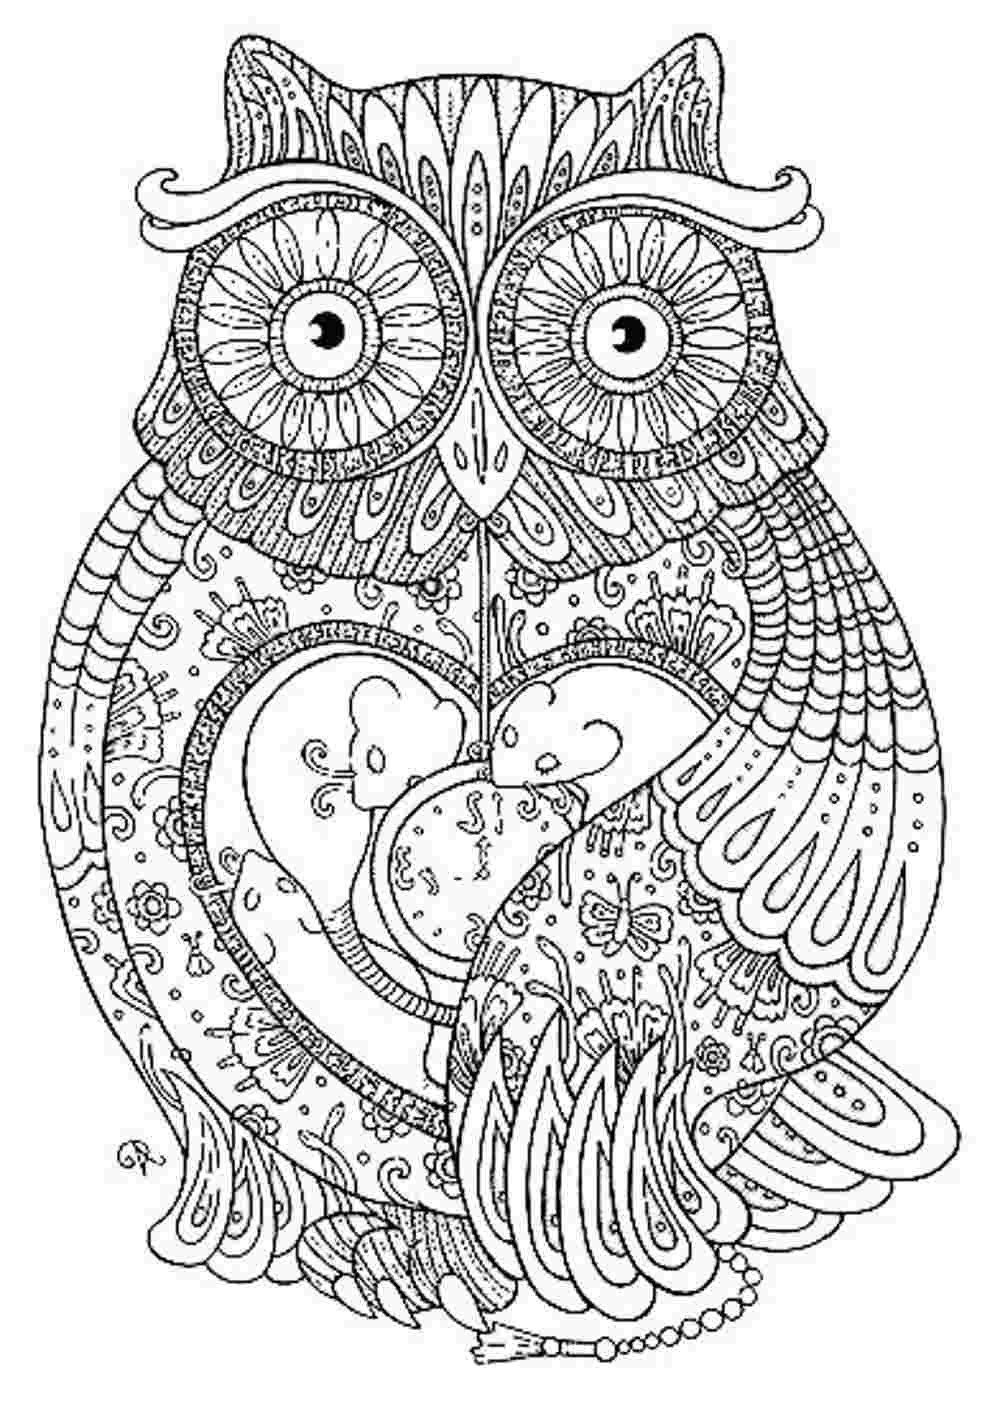 Coloring Pages For Adults Printable Animals
 44 Awesome Free Printable Coloring Pages for Adults